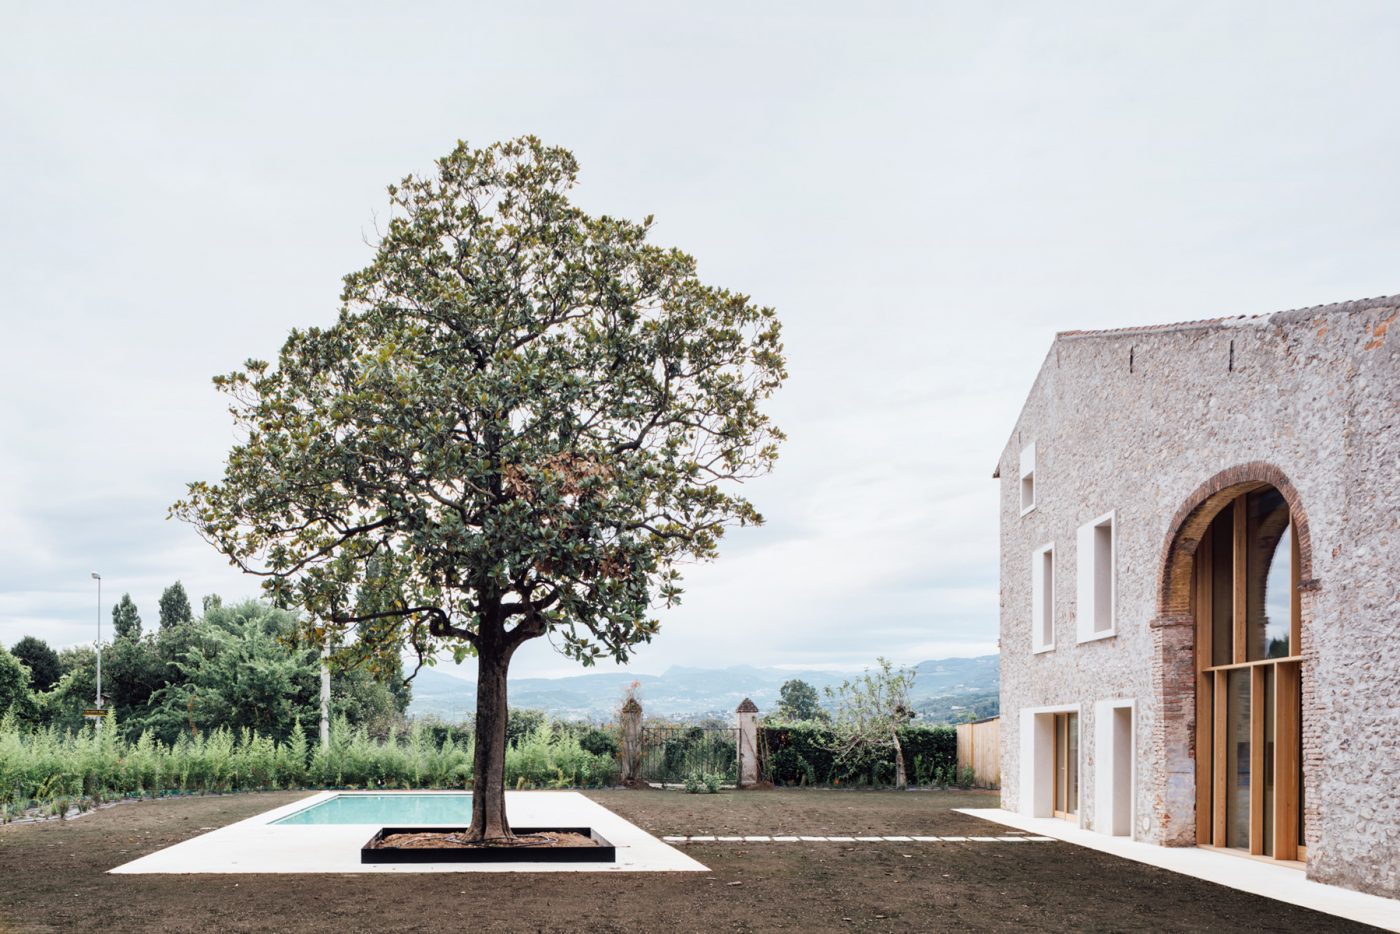 The large magnolia tree and swimming pool located outside "A Country Home in Chievo."